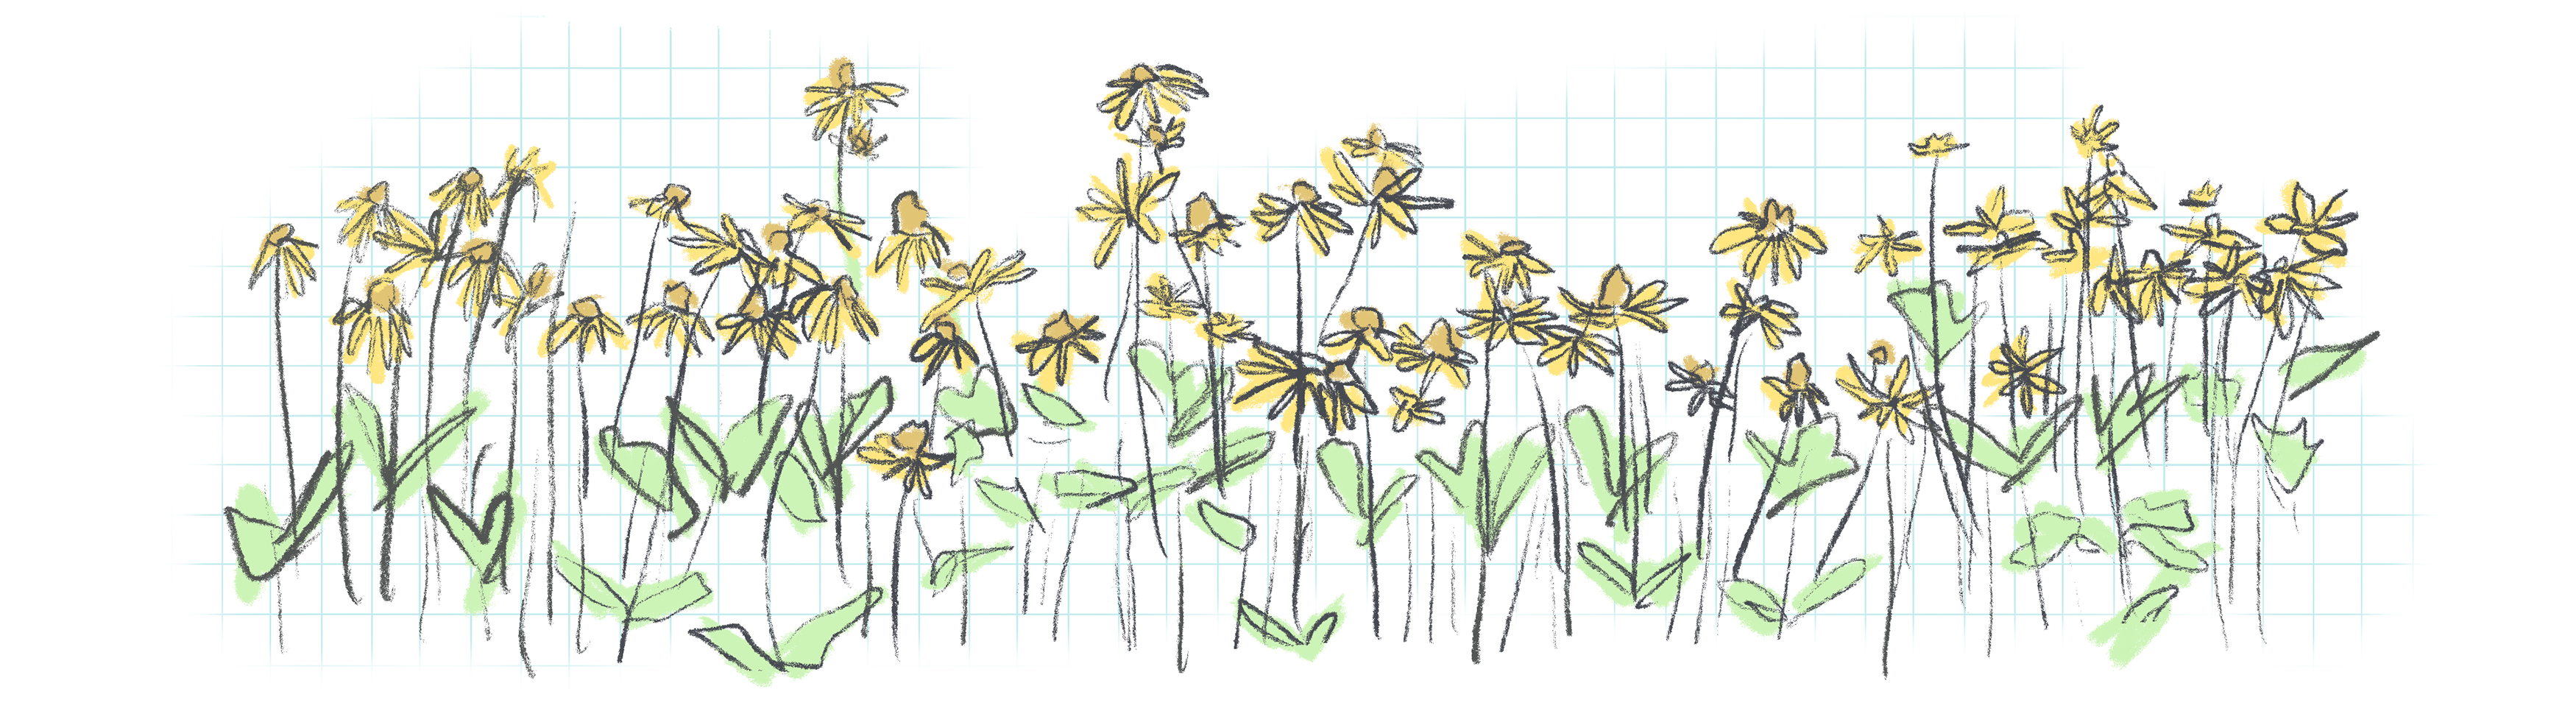 a sketchy illustration of yellow wildflowers against a graph paper background